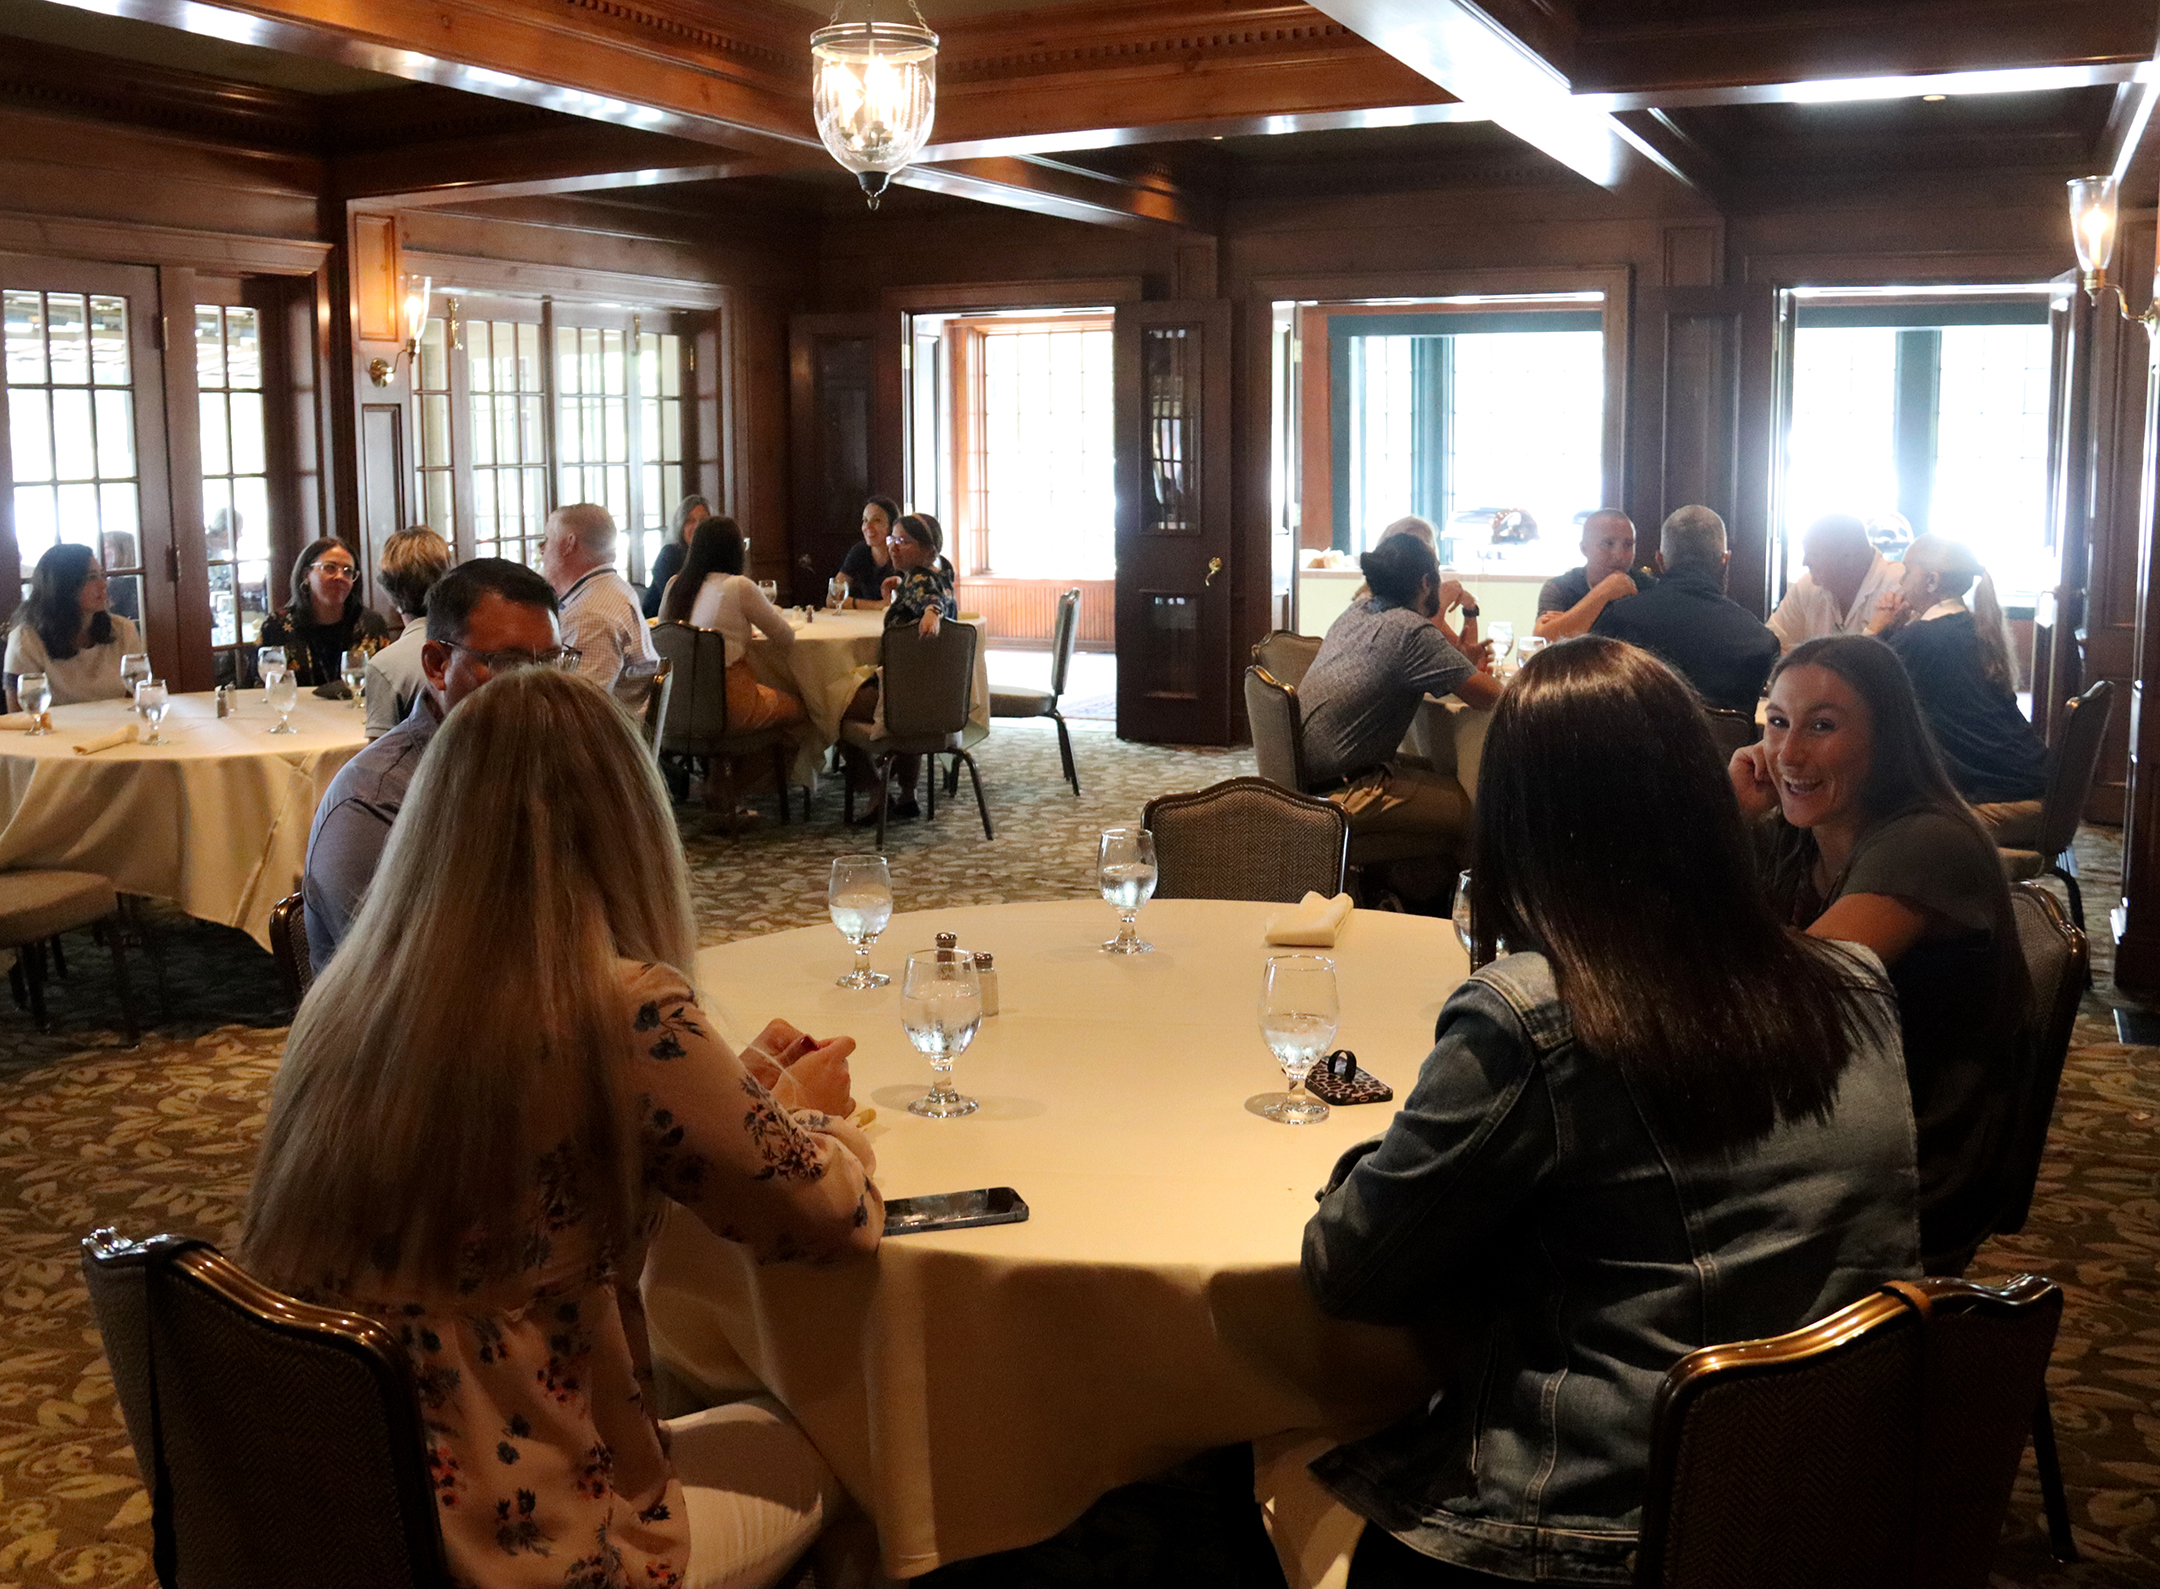 New hires have lunch with administrators at the Sherwood Inn during orientation